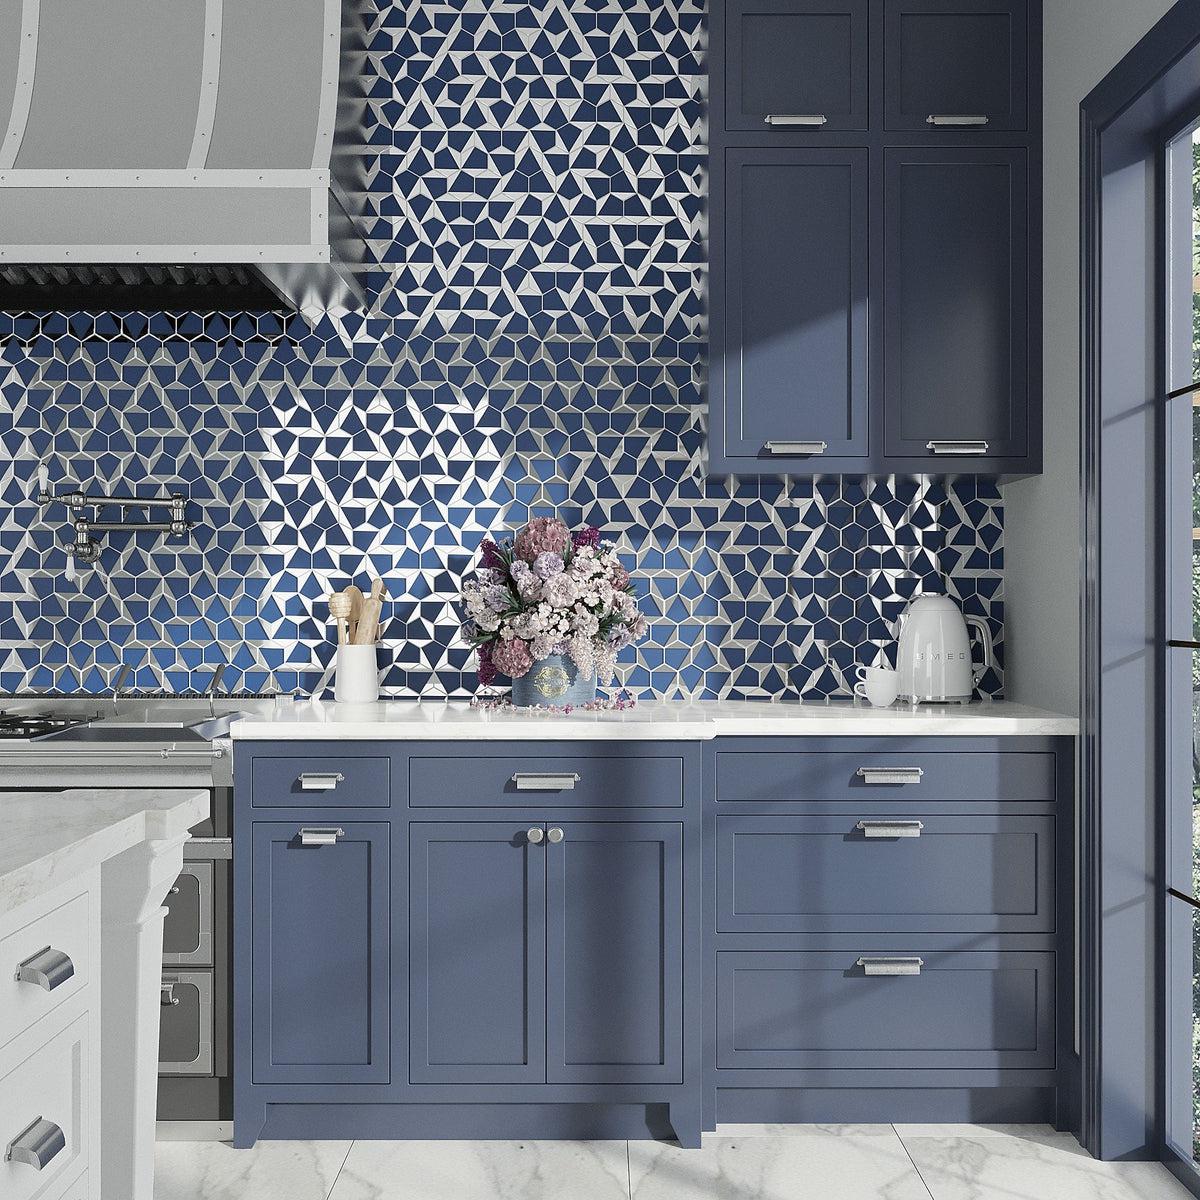 Trendy kitchen with blue hexagon glass tile wall